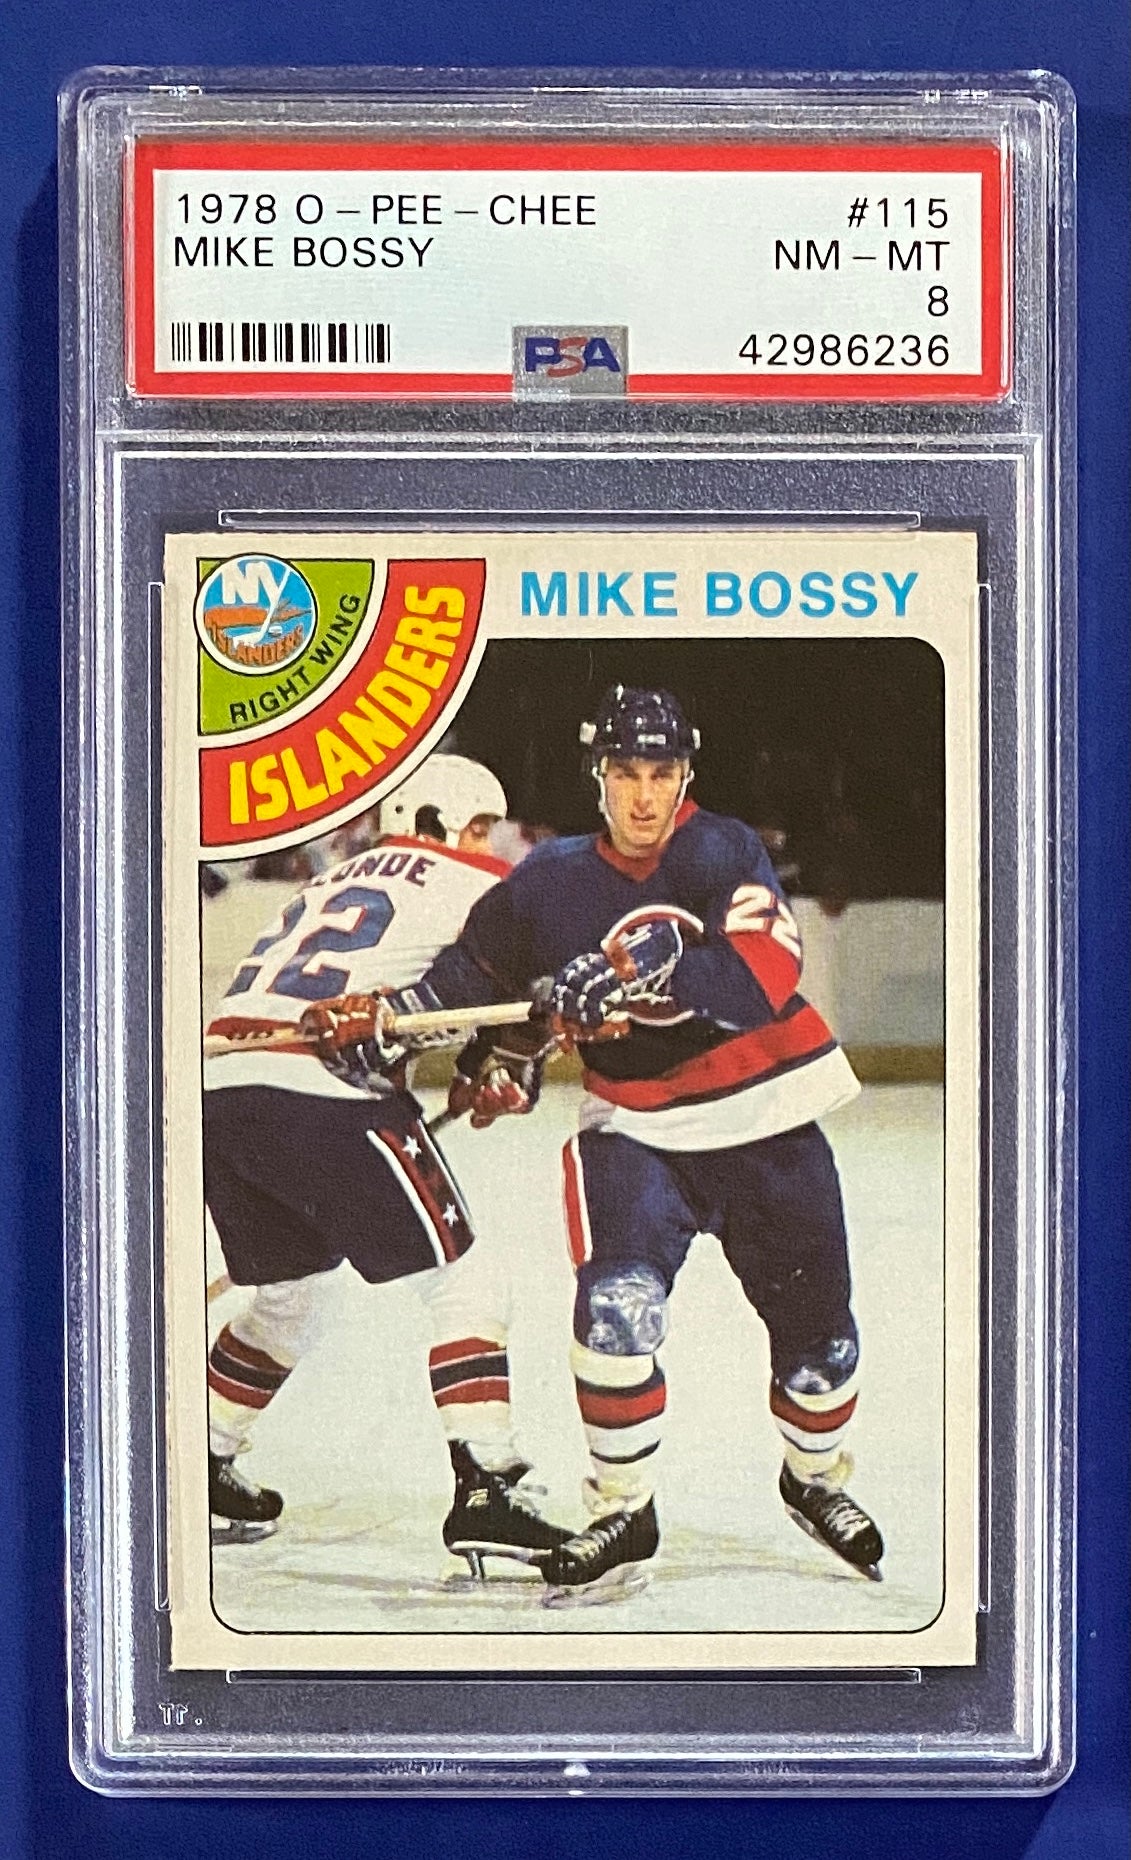 Mike Bossy RC 1978 OPC PSA 8